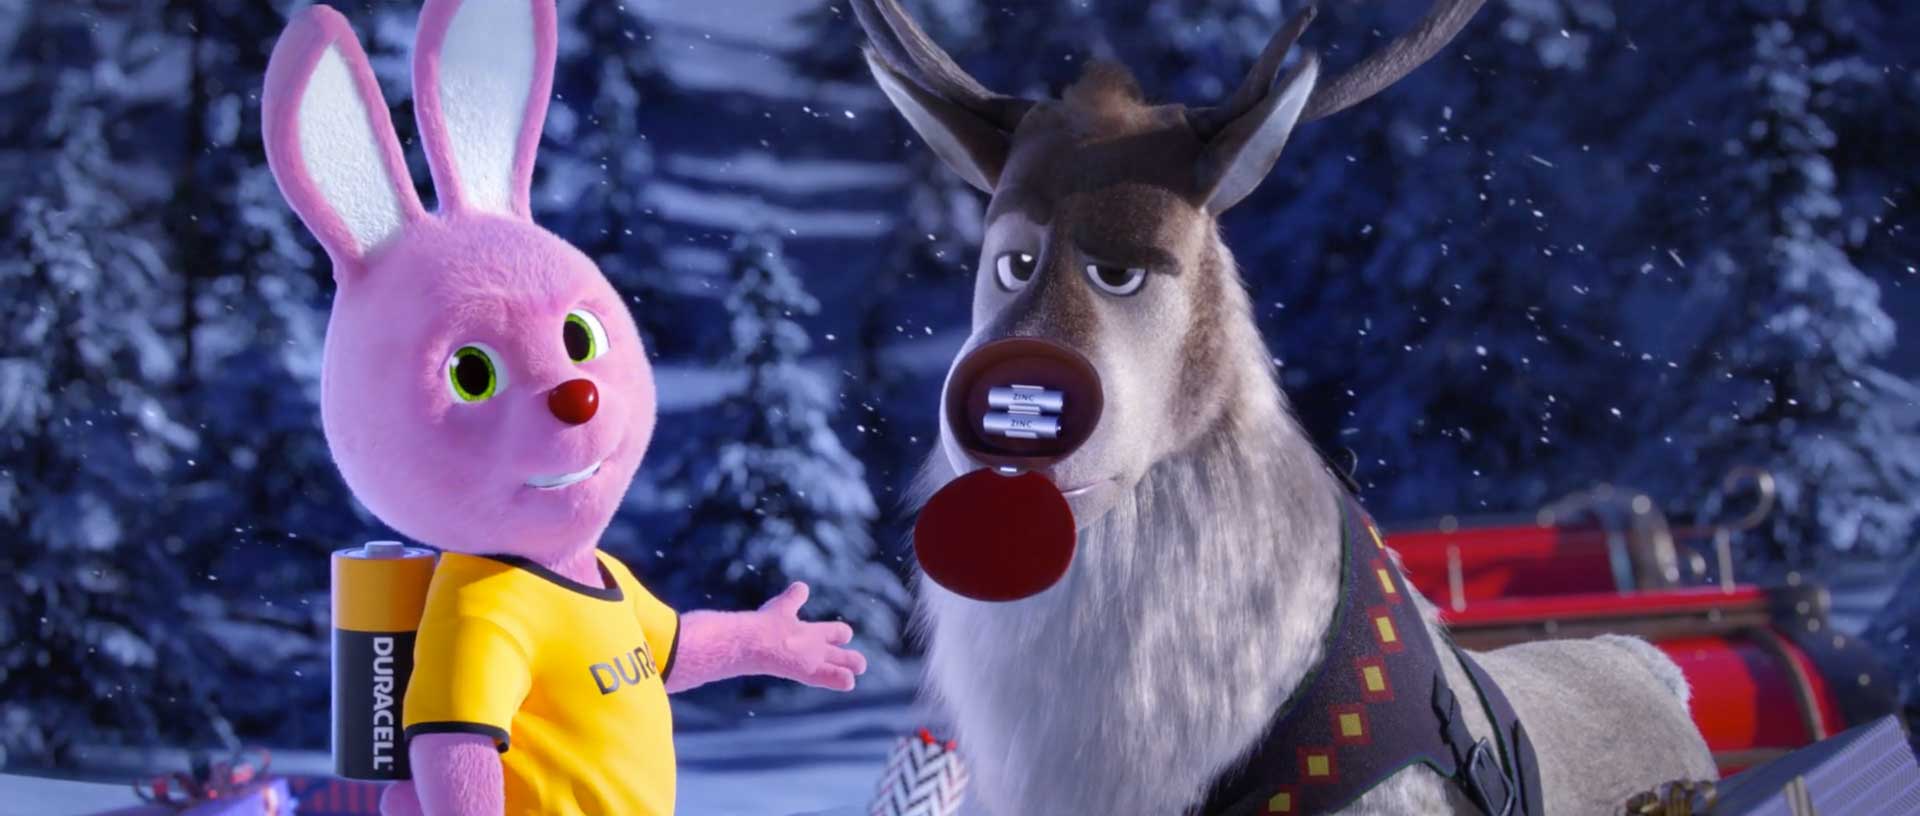 MPC The Mill Paris and the Duracell Bunny Save Christmas | STASH MAGAZINE